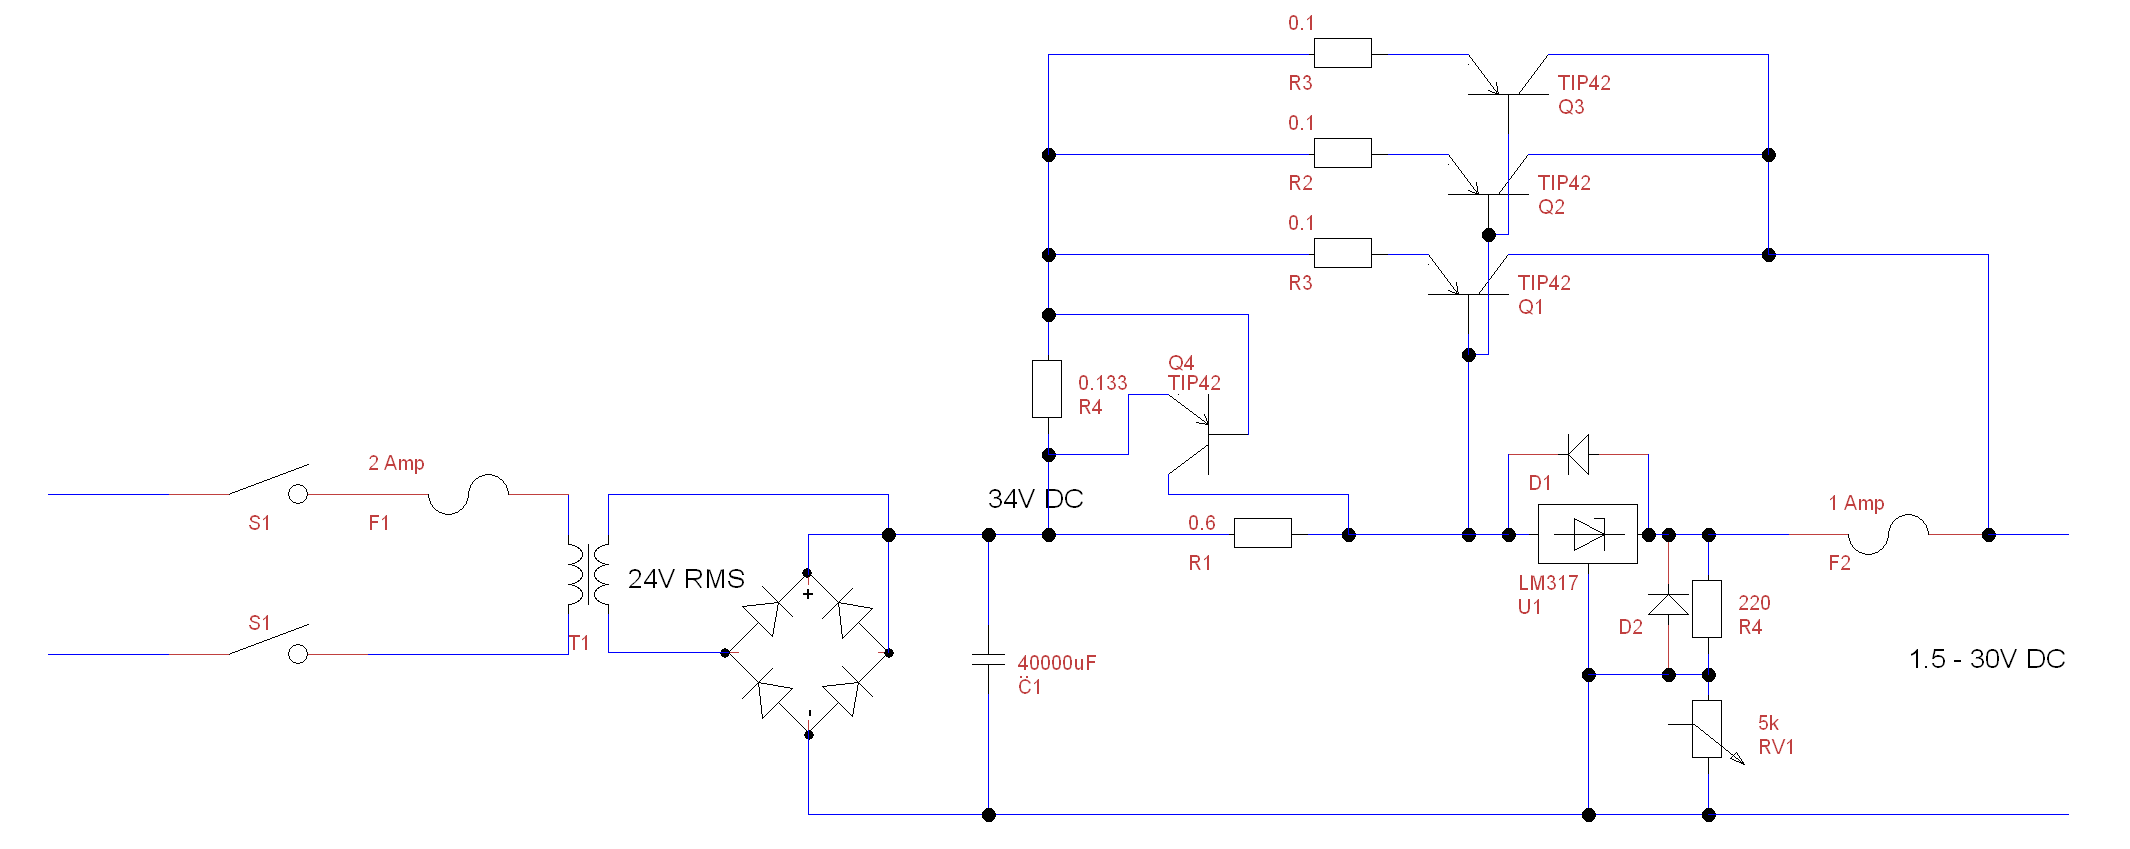 Lm317 0 30v variable power supply circuit diagram.